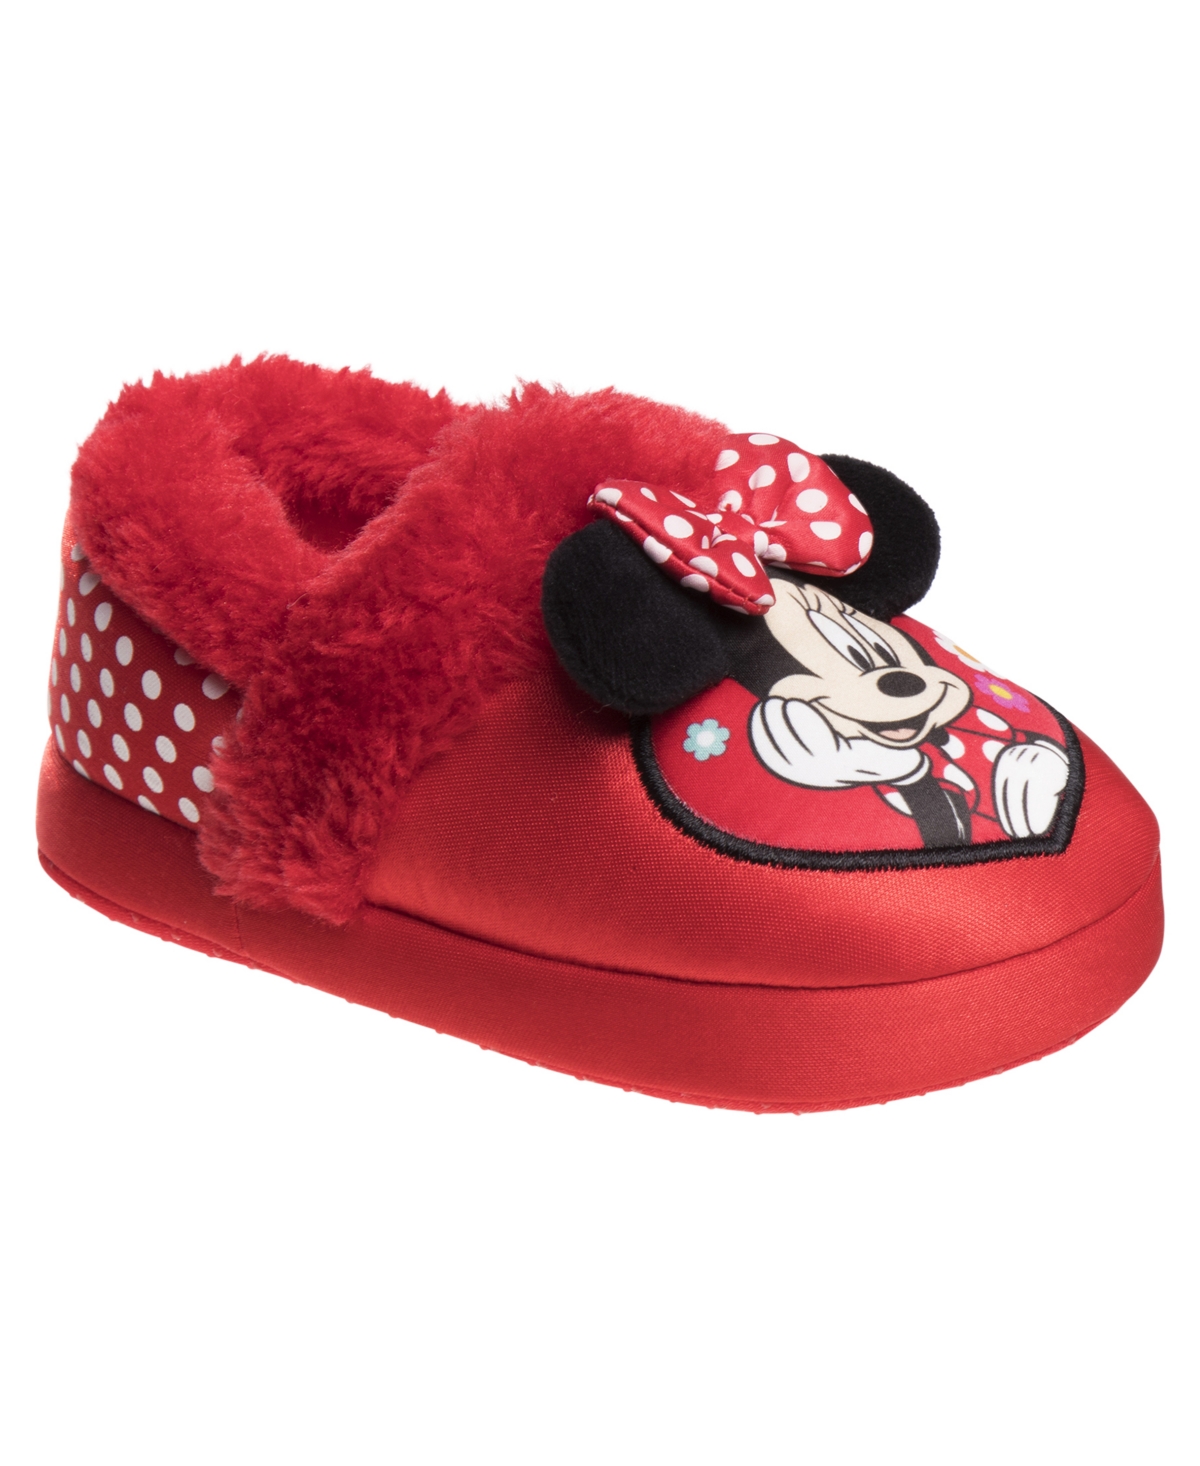 DISNEY TODDLER GIRLS MINNIE MOUSE DUAL SIZES SOFT SLIPPERS